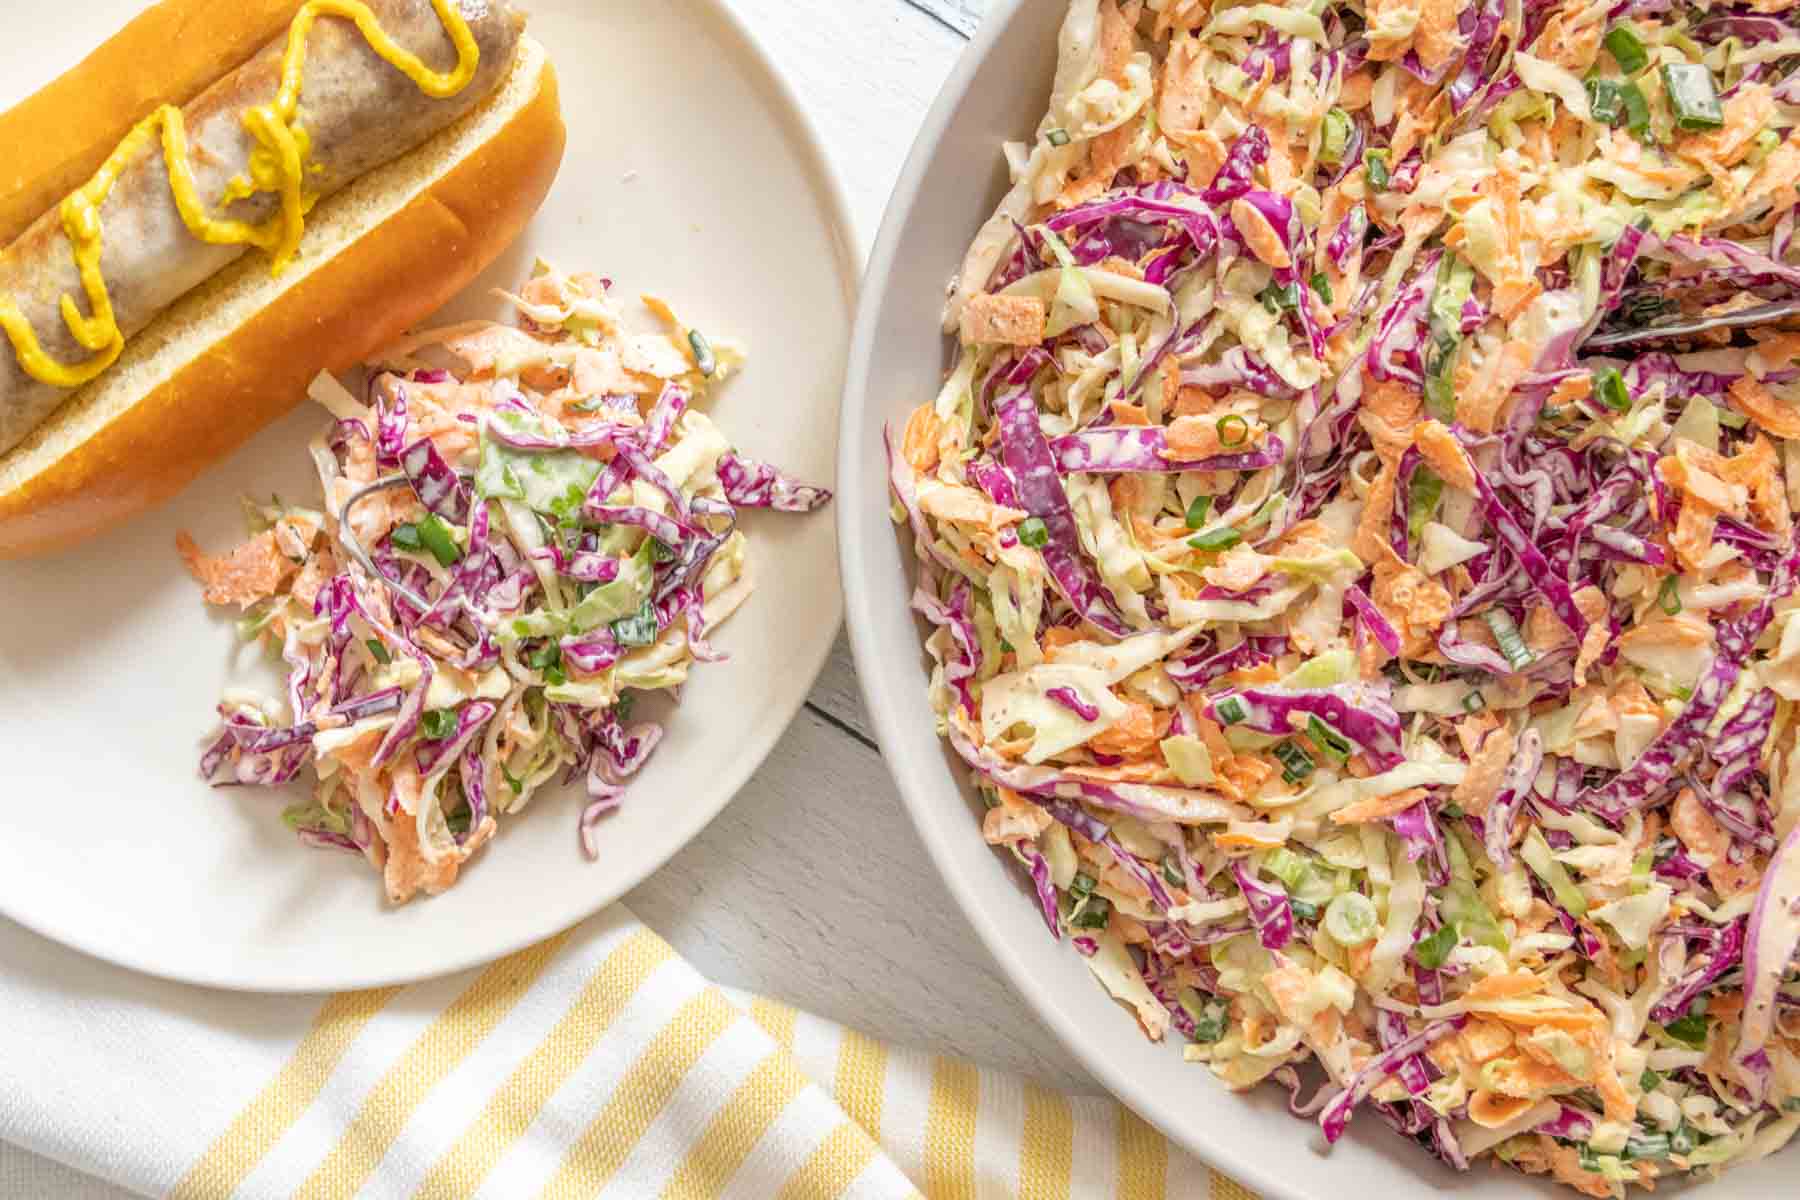 Overhead of coleslaw on a plate and in a large serving dish.